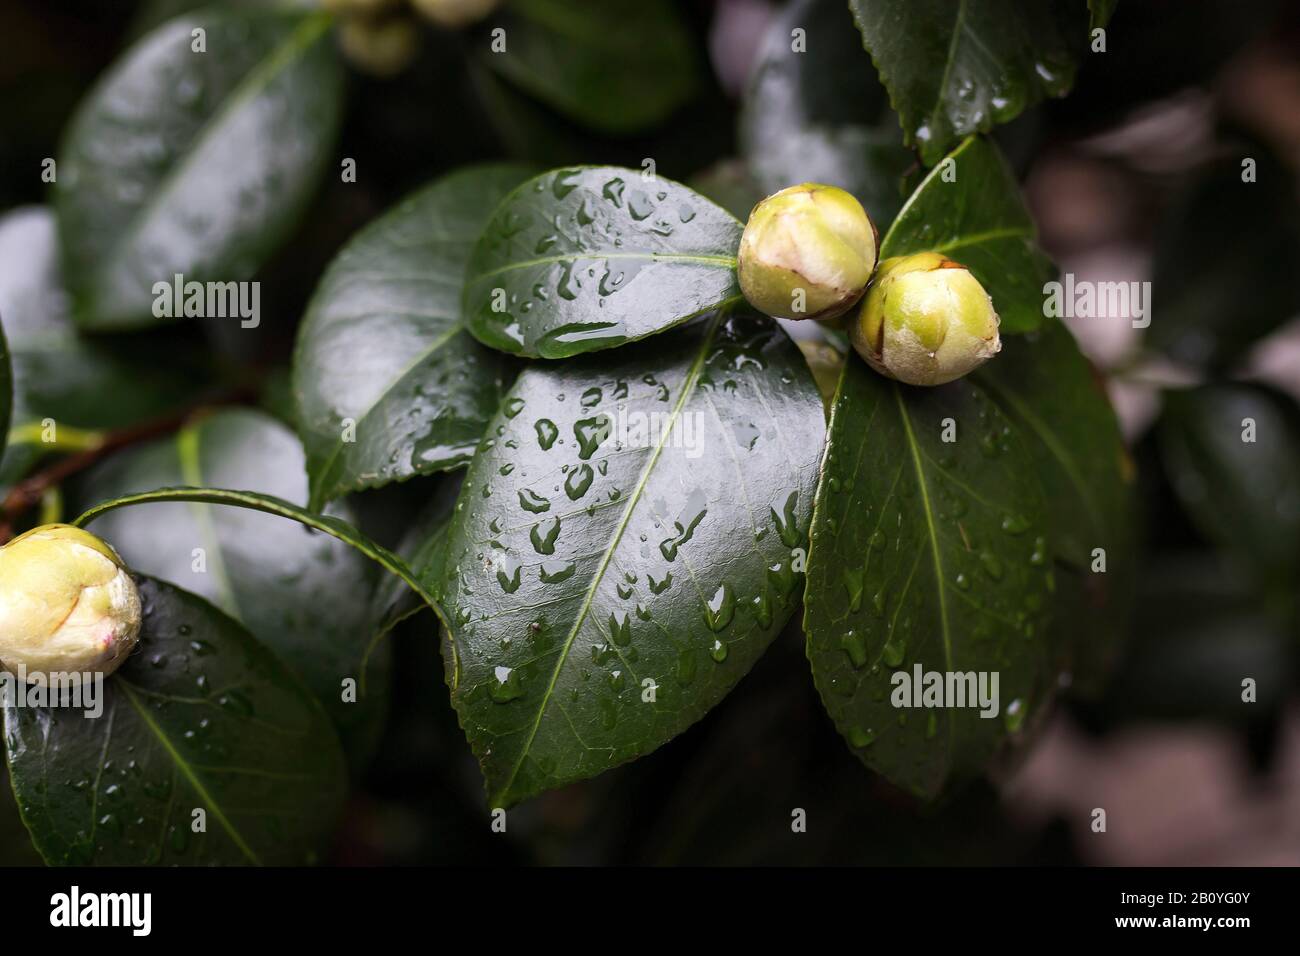 Close-up of a white Camellia Angela Cocchi (Camellia japonica) with green Leaves. View of a beautiful white Camellia Flower Stock Photo